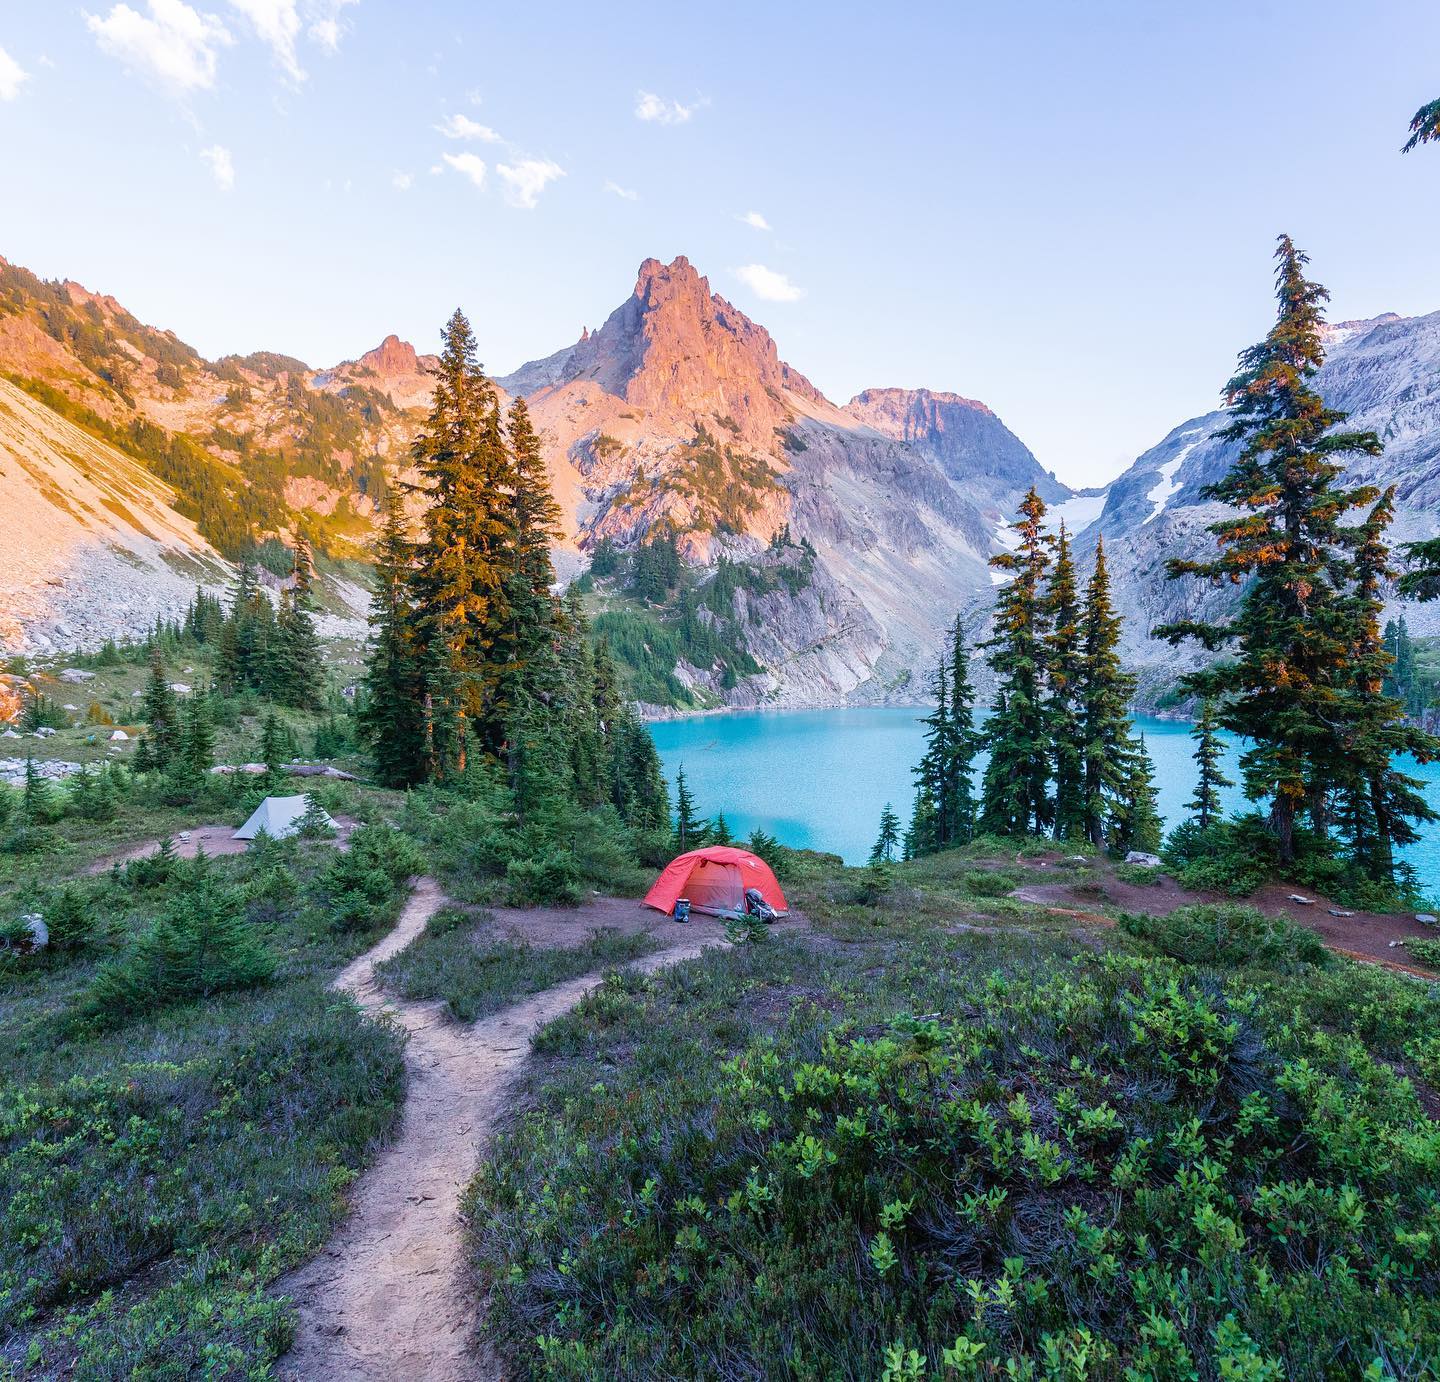 Spent some time in the Alpine Lakes Wilderness a few weeks ago up in Washington 🏕 

This area had been on our short-list for quite sometime. Reid has been wanting to go back ever since he jet through the area on the PCT, and I’ve always wanted to explore the trails for incredible views and alpine lakes. 

We spent two nights out here, one at this incredibly turquoise lake, and the other on top of the ridge line you can see behind the trees and above the snow field. 

.
.
.
.
.
#alpinelakeswilderness #alpinelake #backpackingwomen #backpackinggirls #backpackinggear #bigagnes #pnwadventures #pnwwonderland #hikingbangers #washingtontrails #hikewashington #optoutdoors #hikepnw #hikevibes #campingvibes #stademagazine #suitcasetravels #outsidemagazine #backpackermag #trekkingtoes #explorewashington #outdoorwomen #trailaddict #backpackingviews #backpackingadventures #sheexplores #sleepinthedirt #backcountrycamping #findyourbackcountry